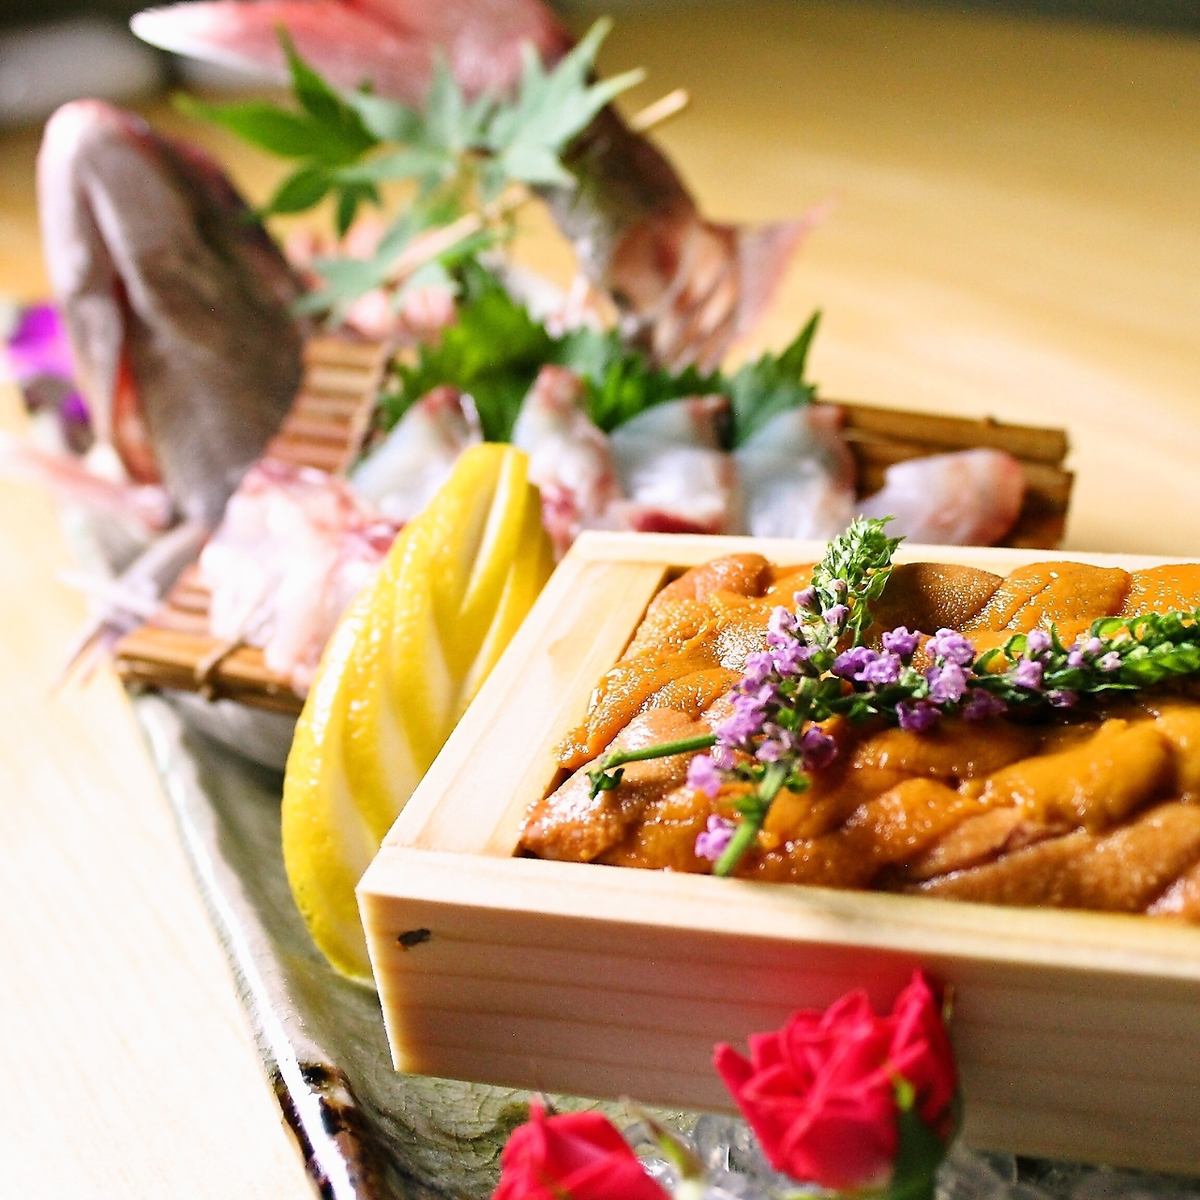 Enjoy the proud sake and creative Japanese food in a private room in the basement that can accommodate up to 6 people